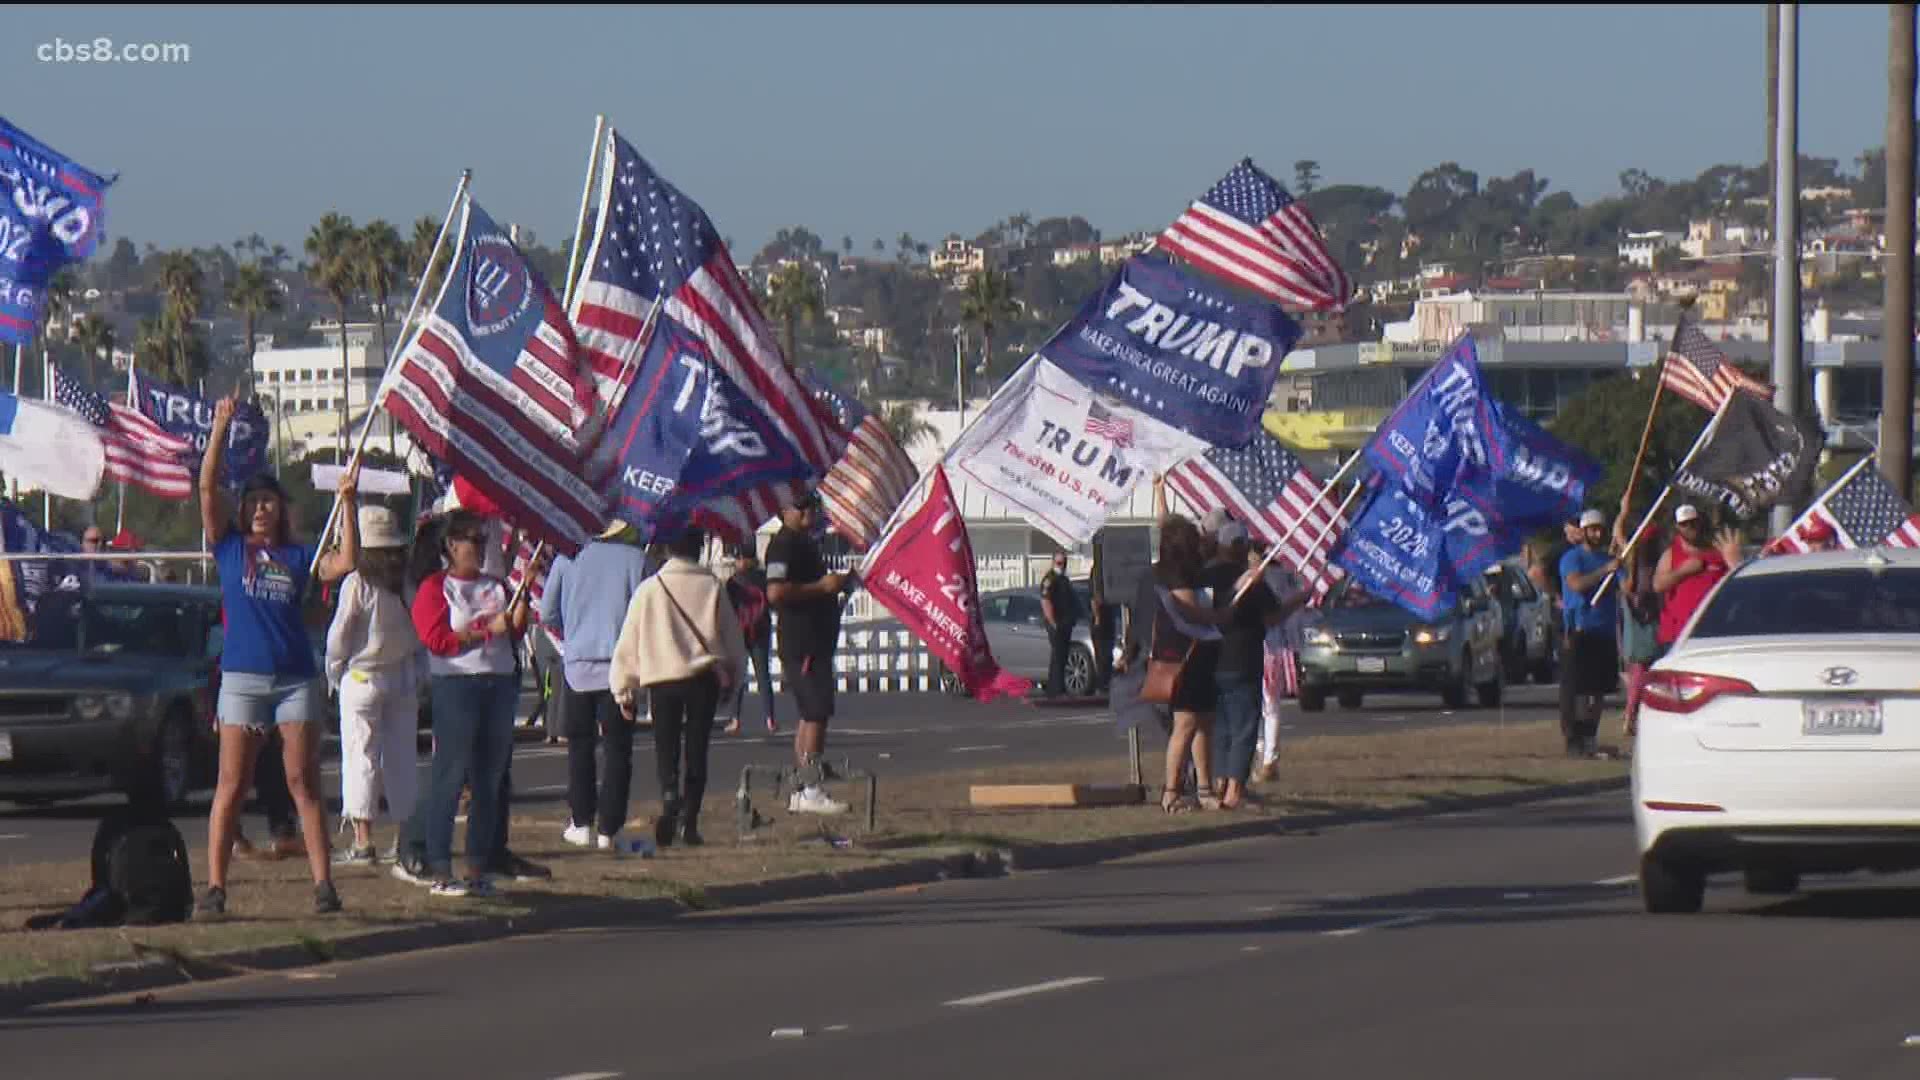 The rally in San Diego coincided with other "Million MAGA Marches" throughout the country.